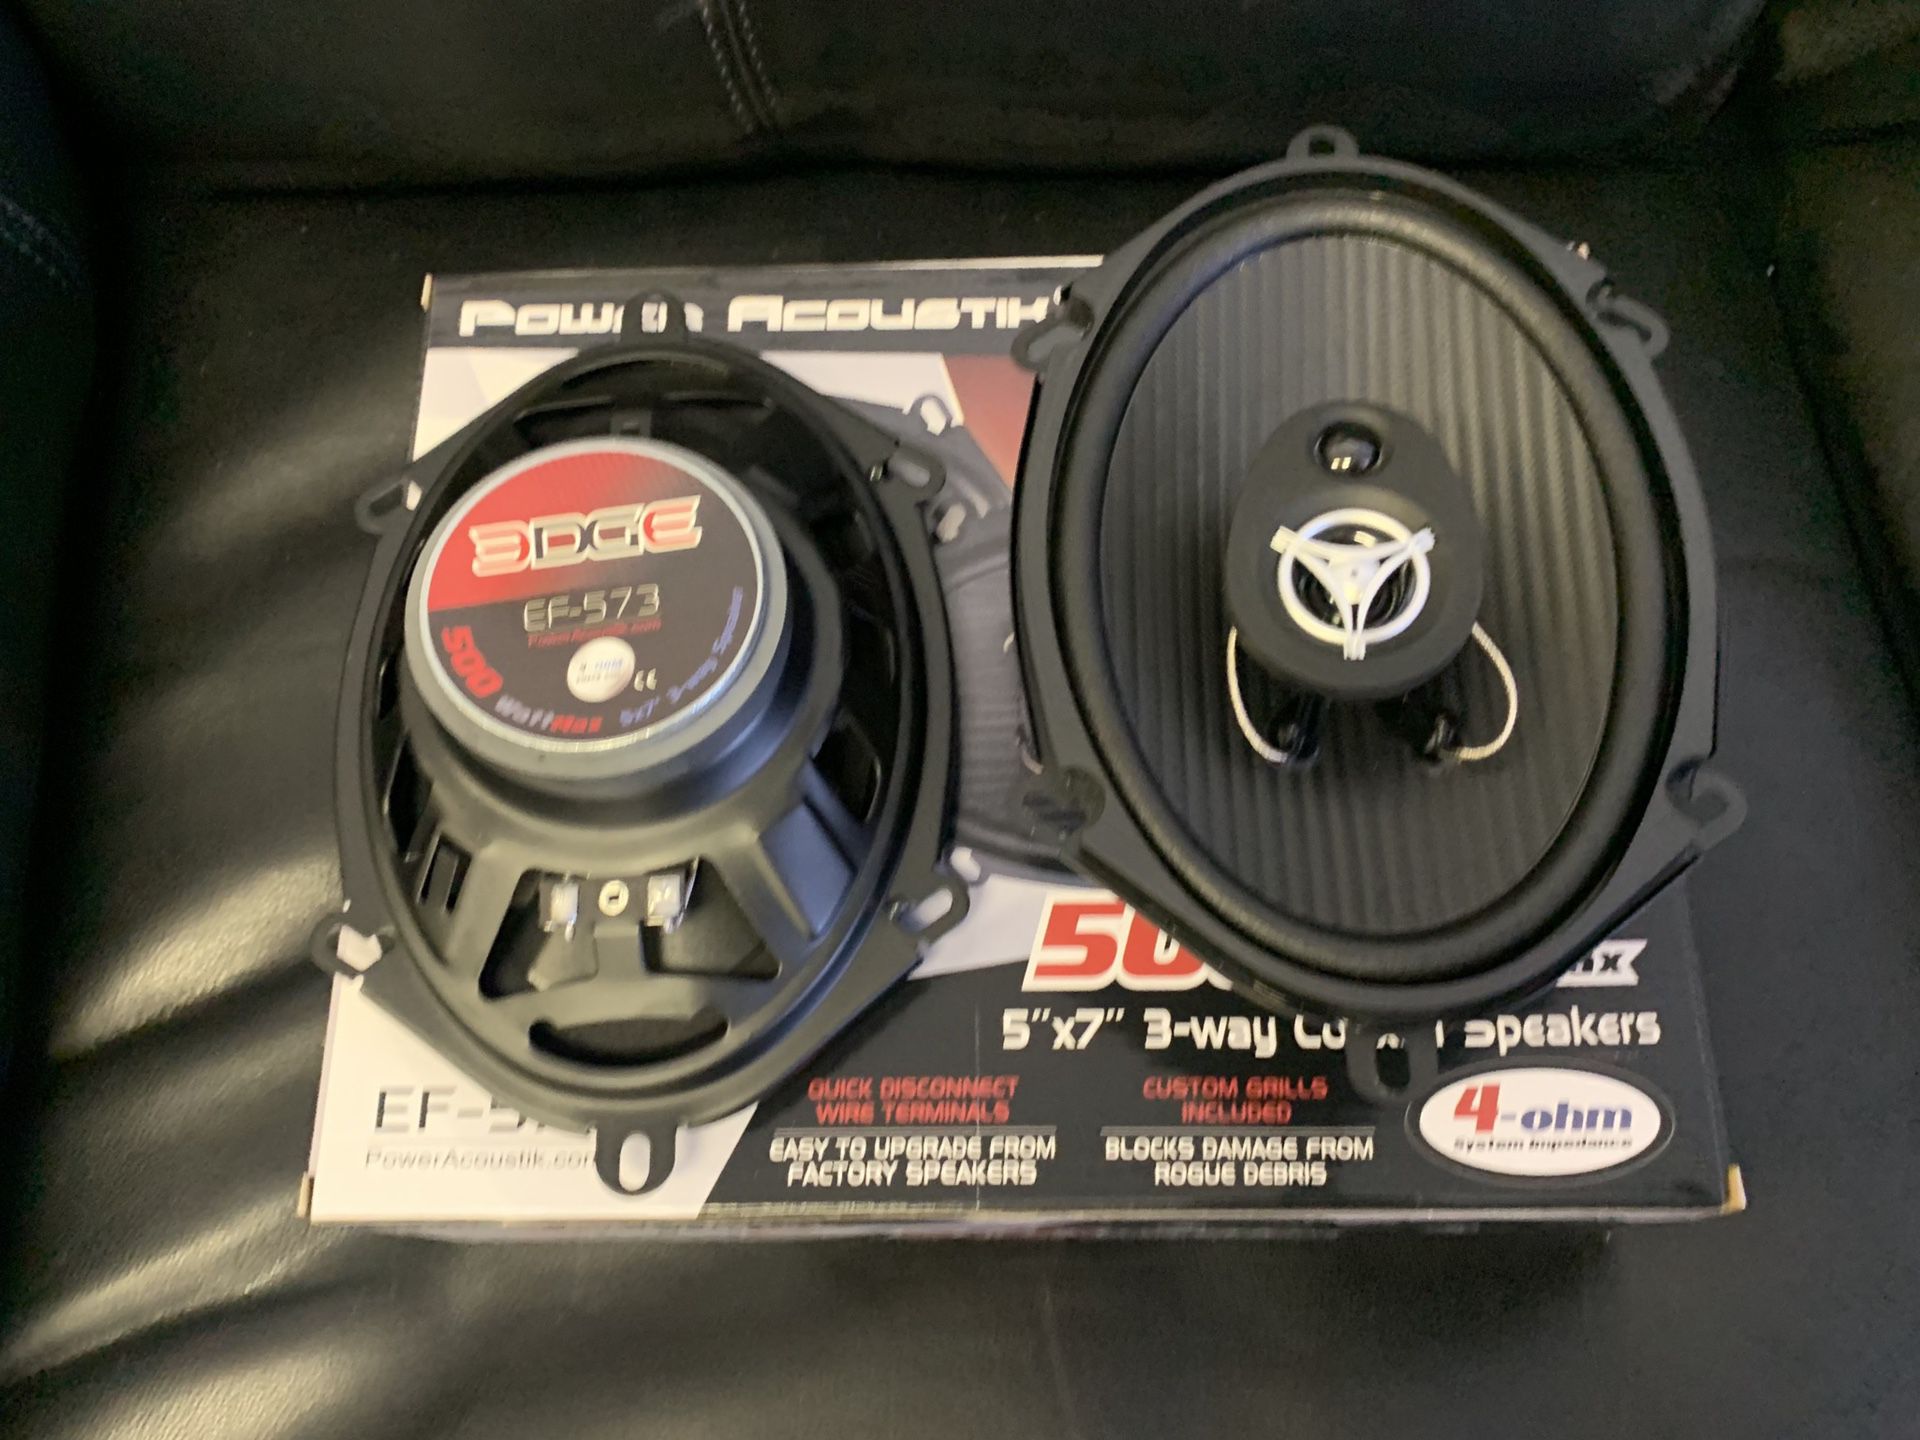 Power acoustic car audio 5x7 6x8 car stereo speakers . 500 watts . New